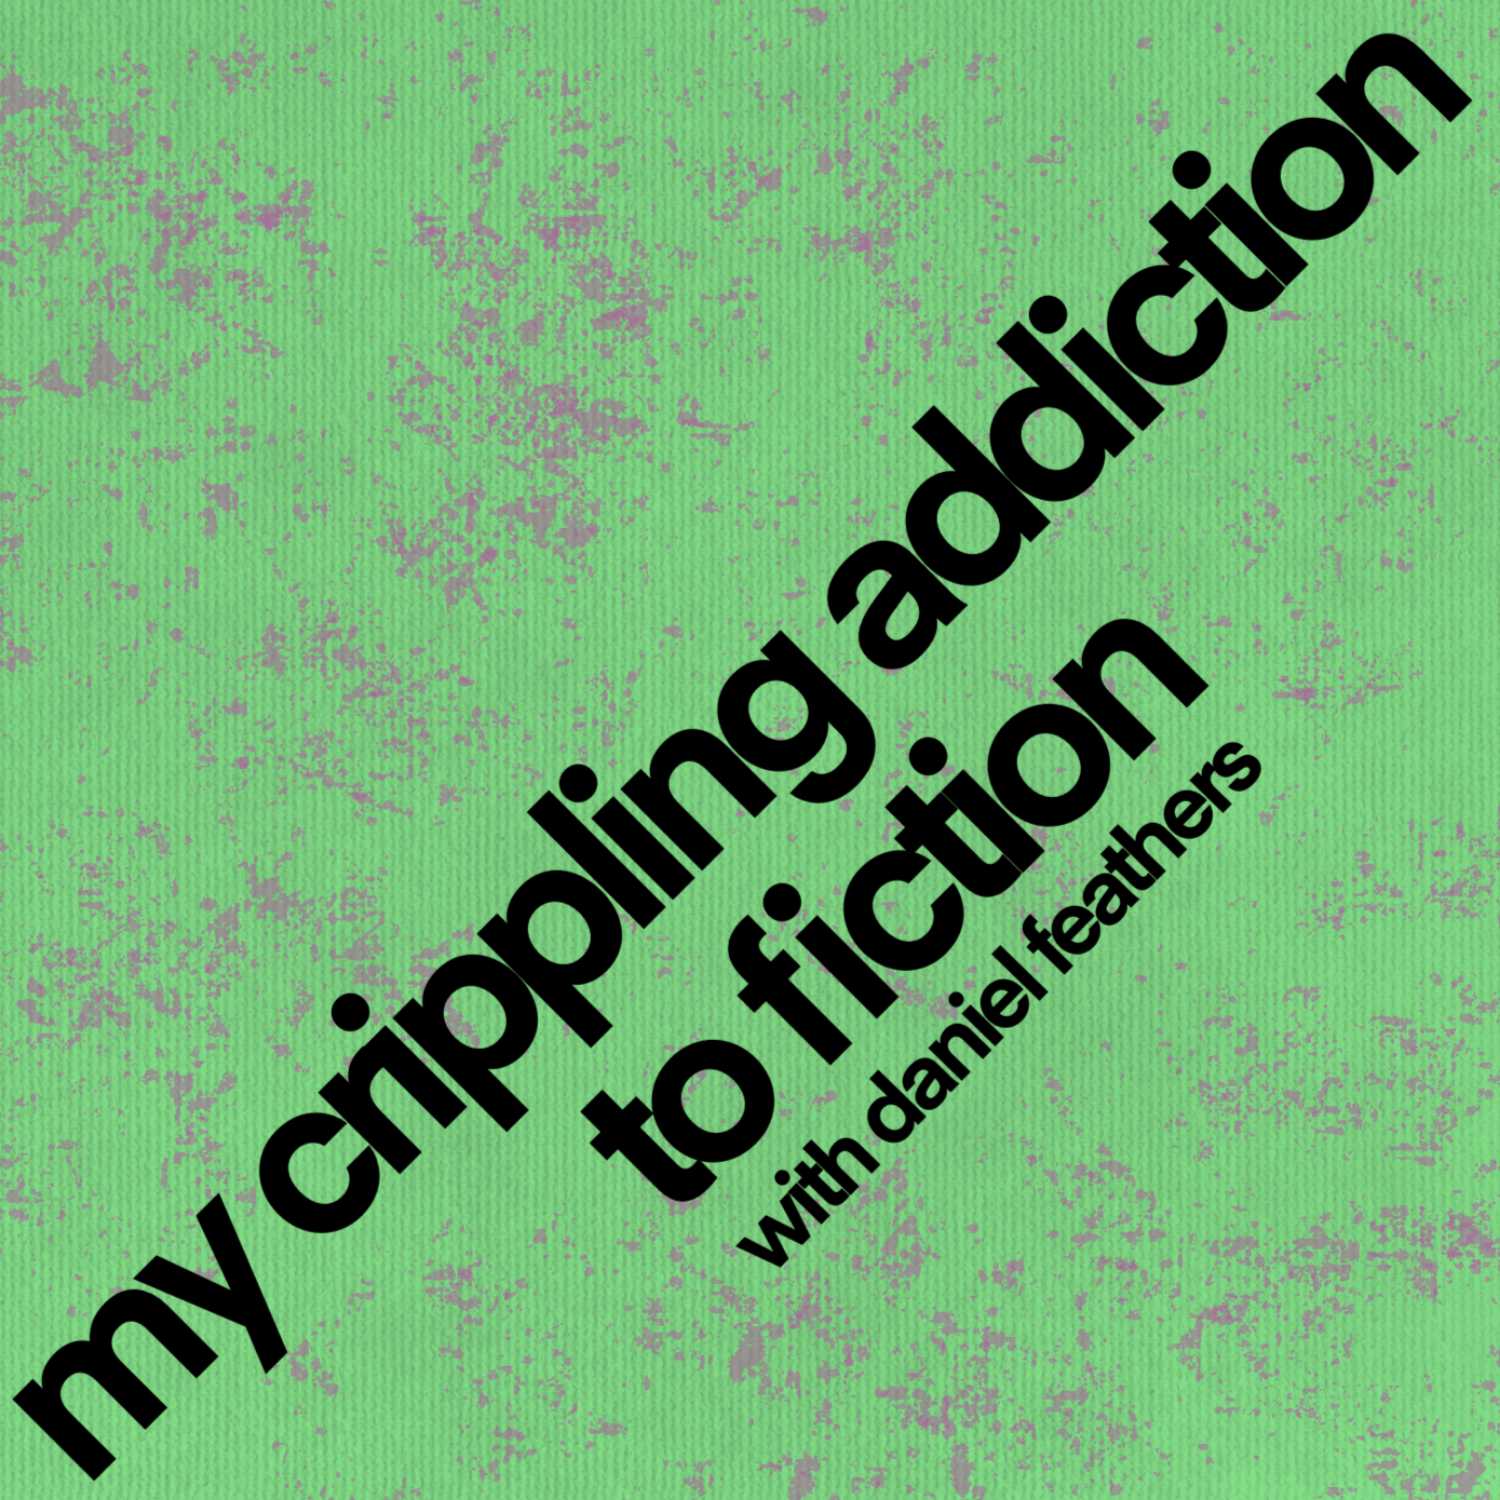 My Crippling Addiction to Fiction